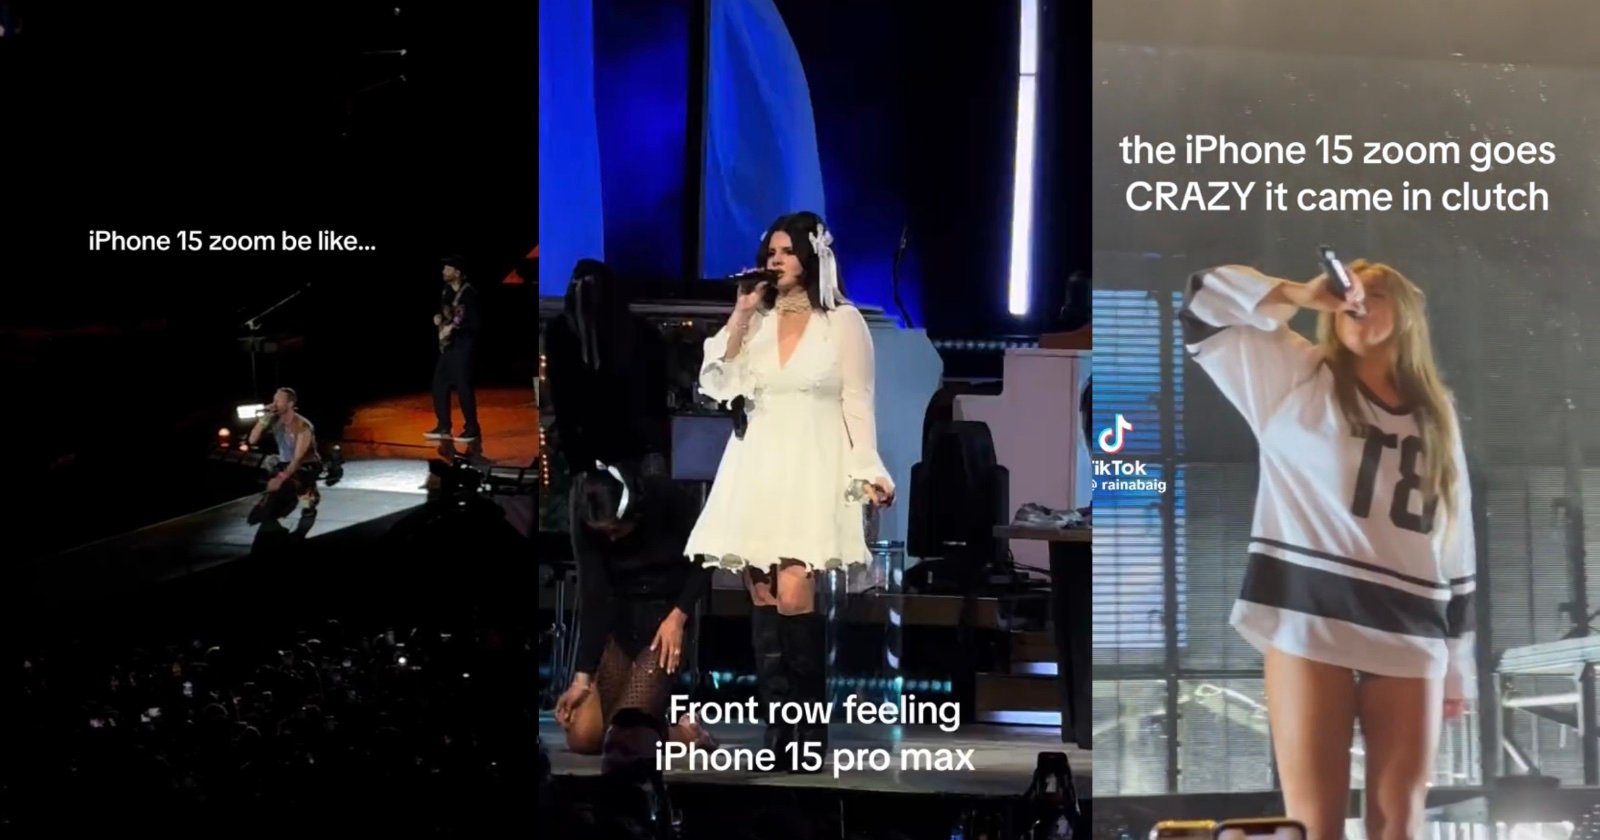 Concertgoers use iPhone 15 zoom for front row experience at lana del rey and colplay concerts